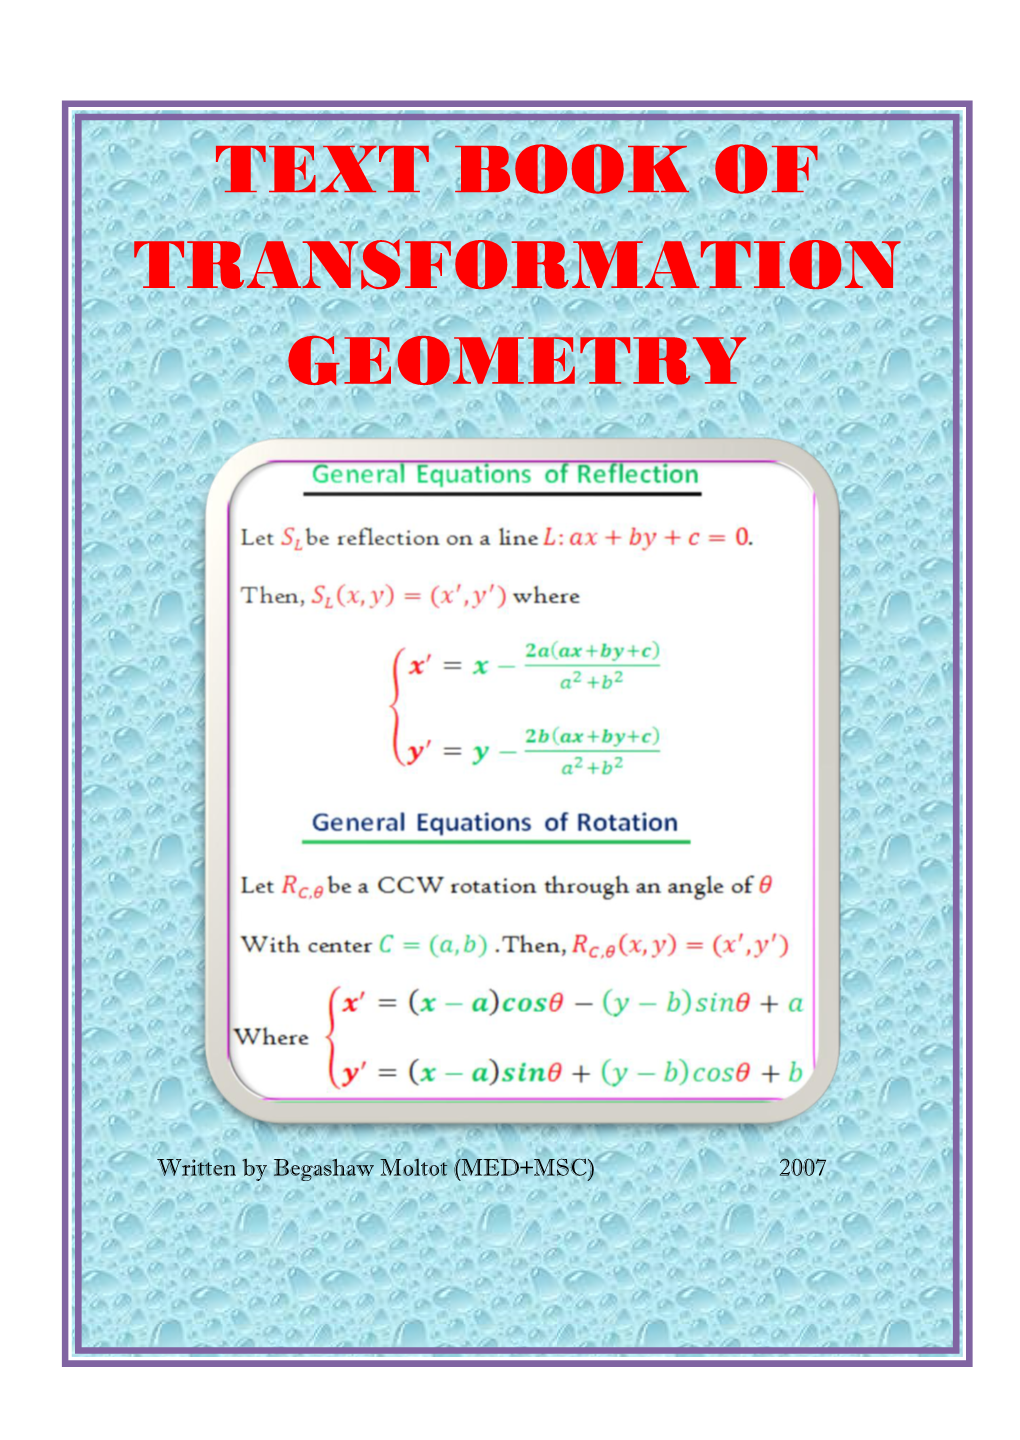 Text Book of Transformation Geometry by Begashaw M. for Your Comments, Use -0938836262